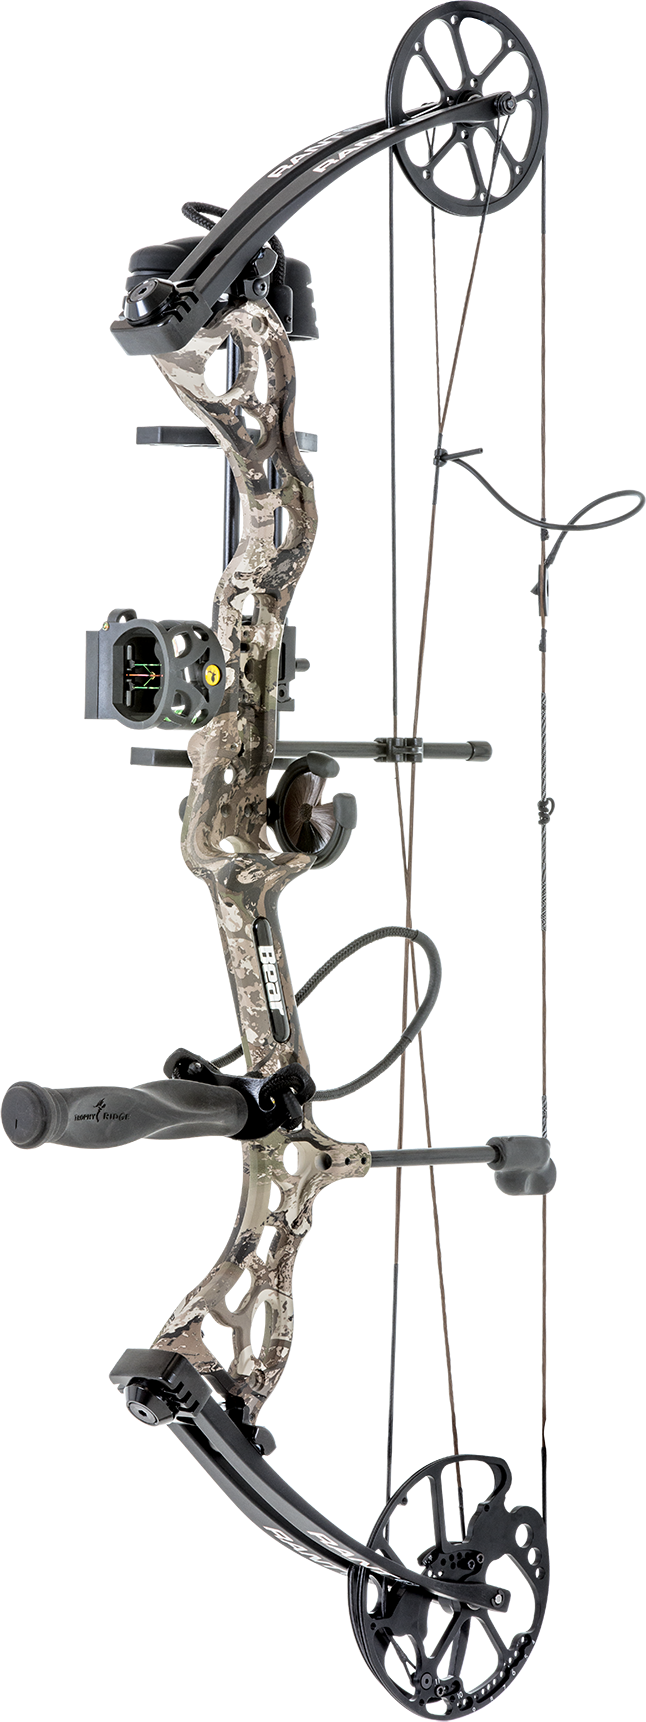 Bear Rant RTH Compound Bow Compound Bow - Adult_1